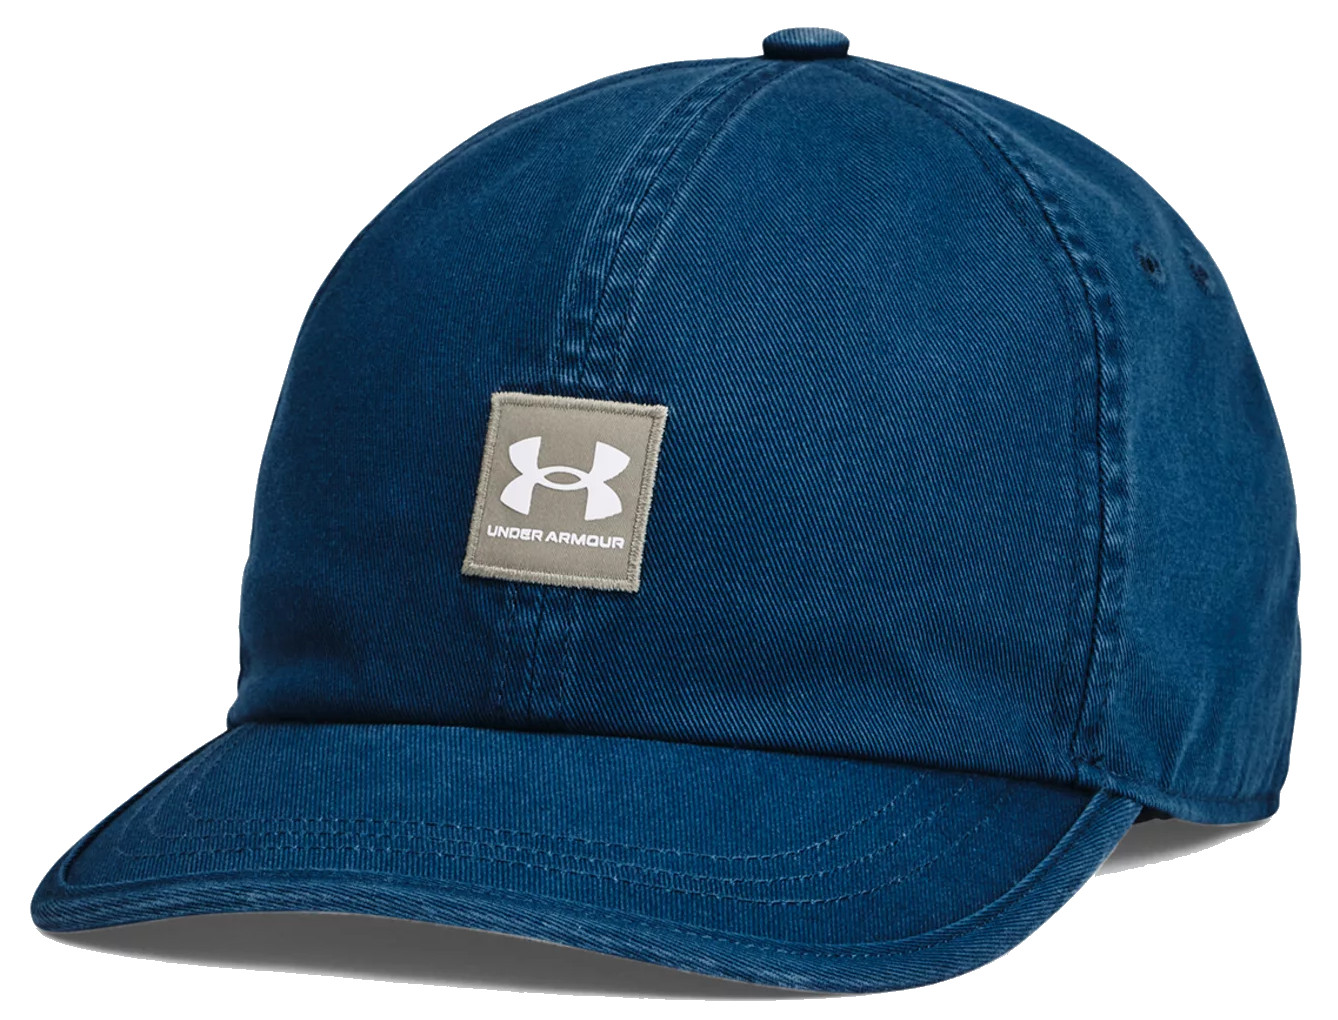 https://i1.t4s.cz/products/1376703-426/under-armour-under-armour-ua-branded-snapback-662015-1376703-426.jpg